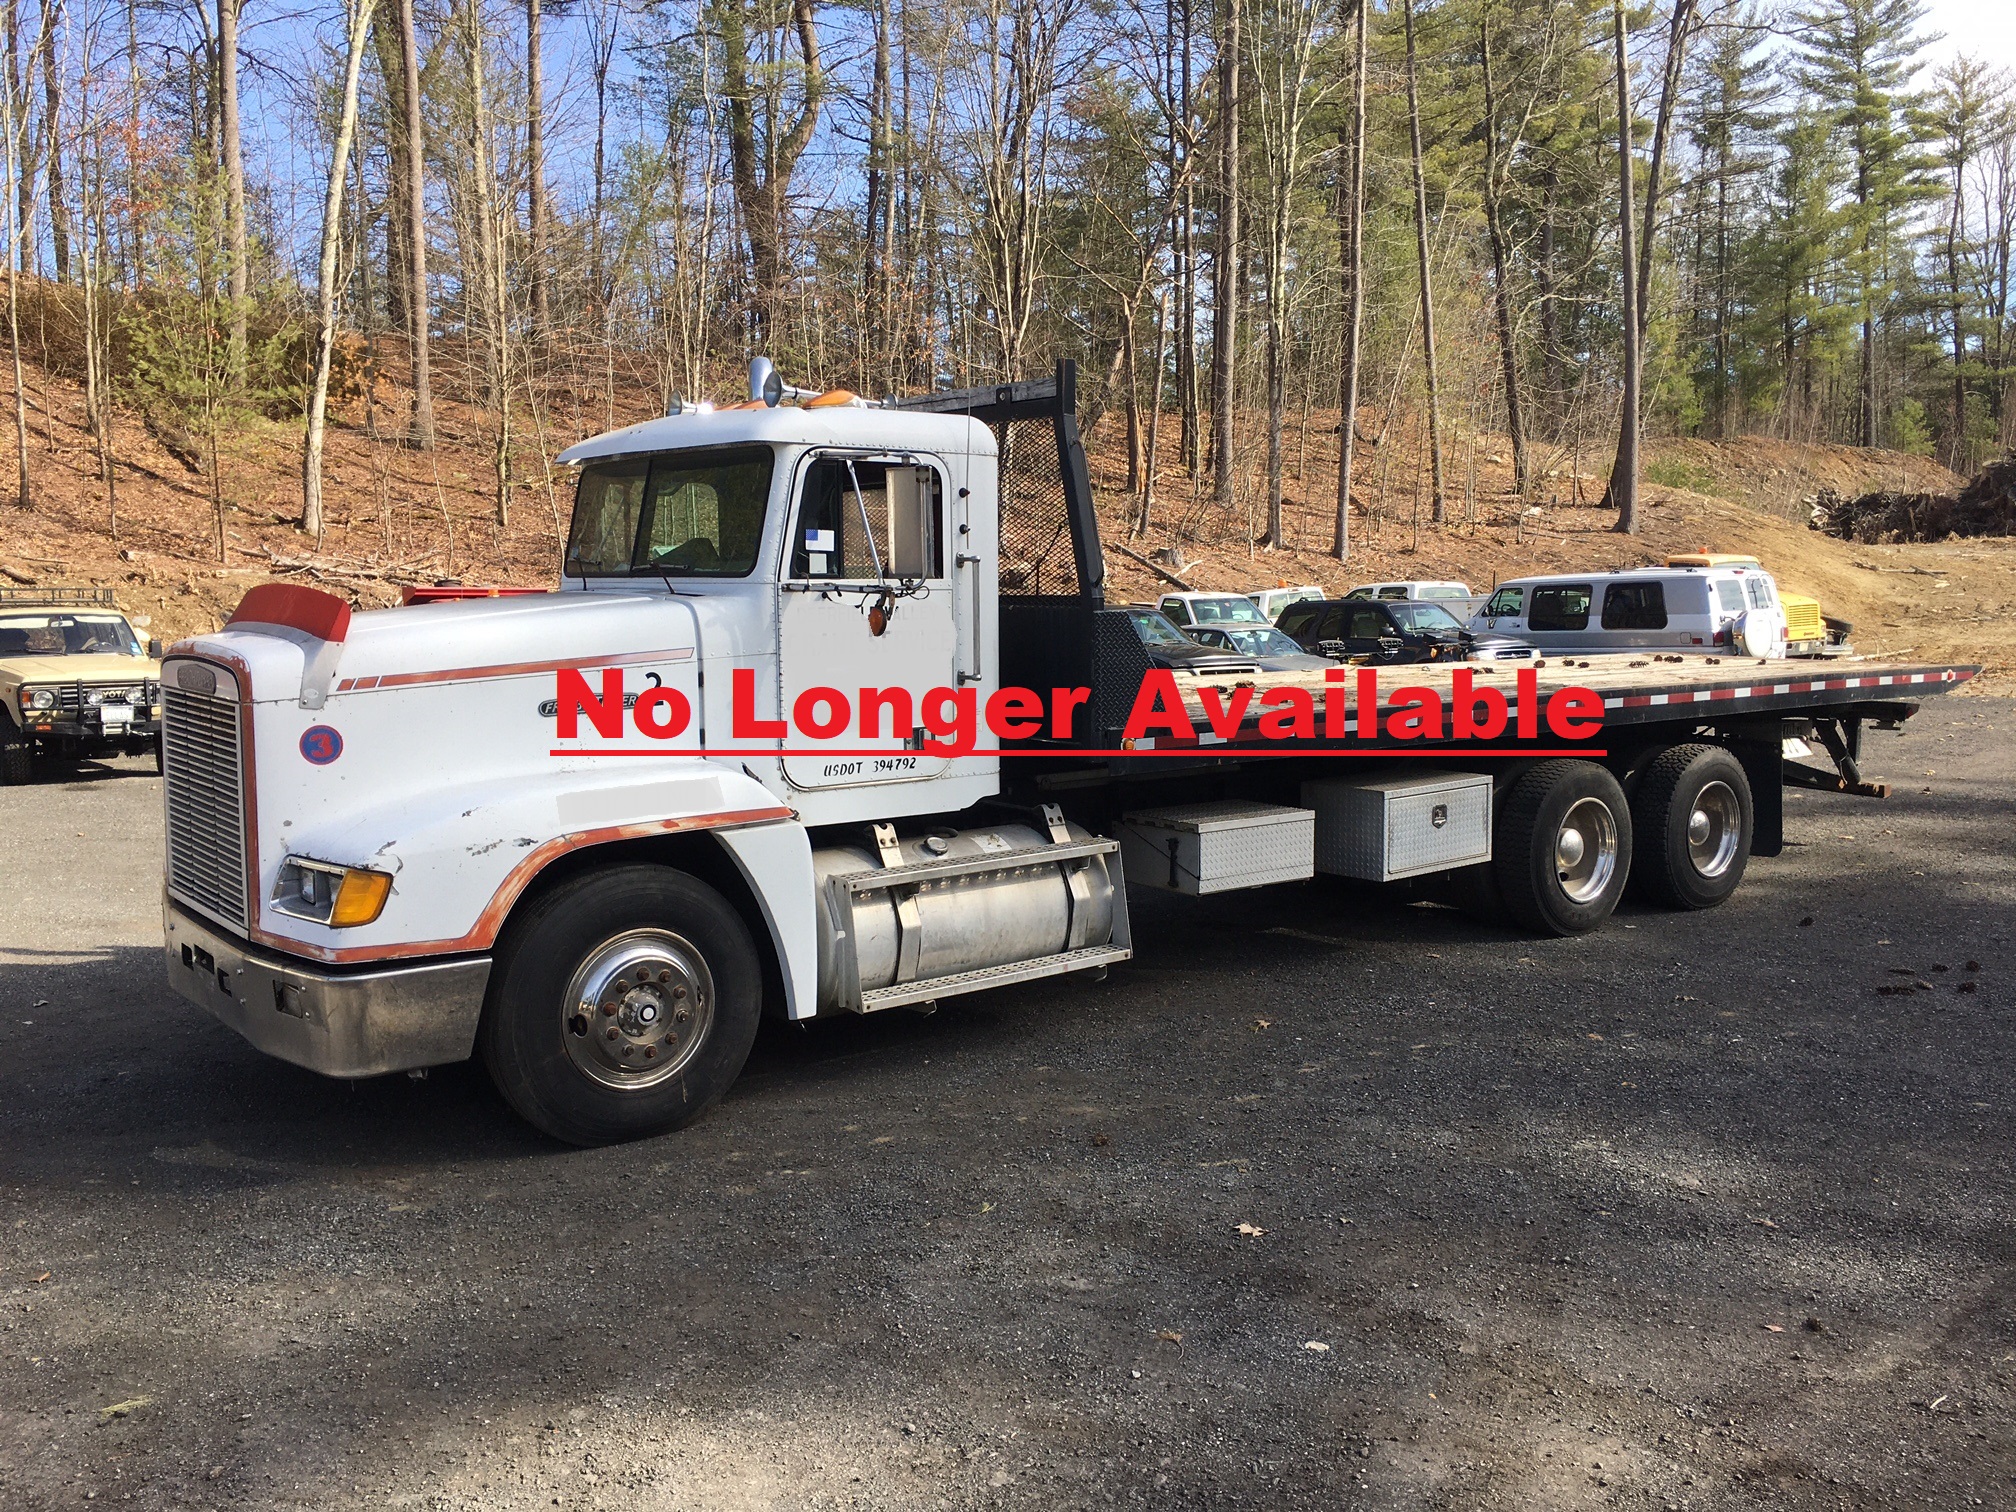 Freightliner Rollback Tow Truck. 1989 FLD 120 with a Caterpillar 14.6 liter six cylinder diesel motor with 704'116 miles. The transmission is an Eaton Fuller Road Ranger performance 9 speed with low. It has air ride suspension. The trucks fitted with a Jarr-Dan roll off flatbed and a Ramsey heavy duty winch. Measurements for the flatbed are 28 feet long by 8 feet wide and sits 4 feet 4 1/2 inches off the ground. The truck has AC, air ride driver seat, heated mirrors, engine break. The trucks GVWR is 40'000 lbs.